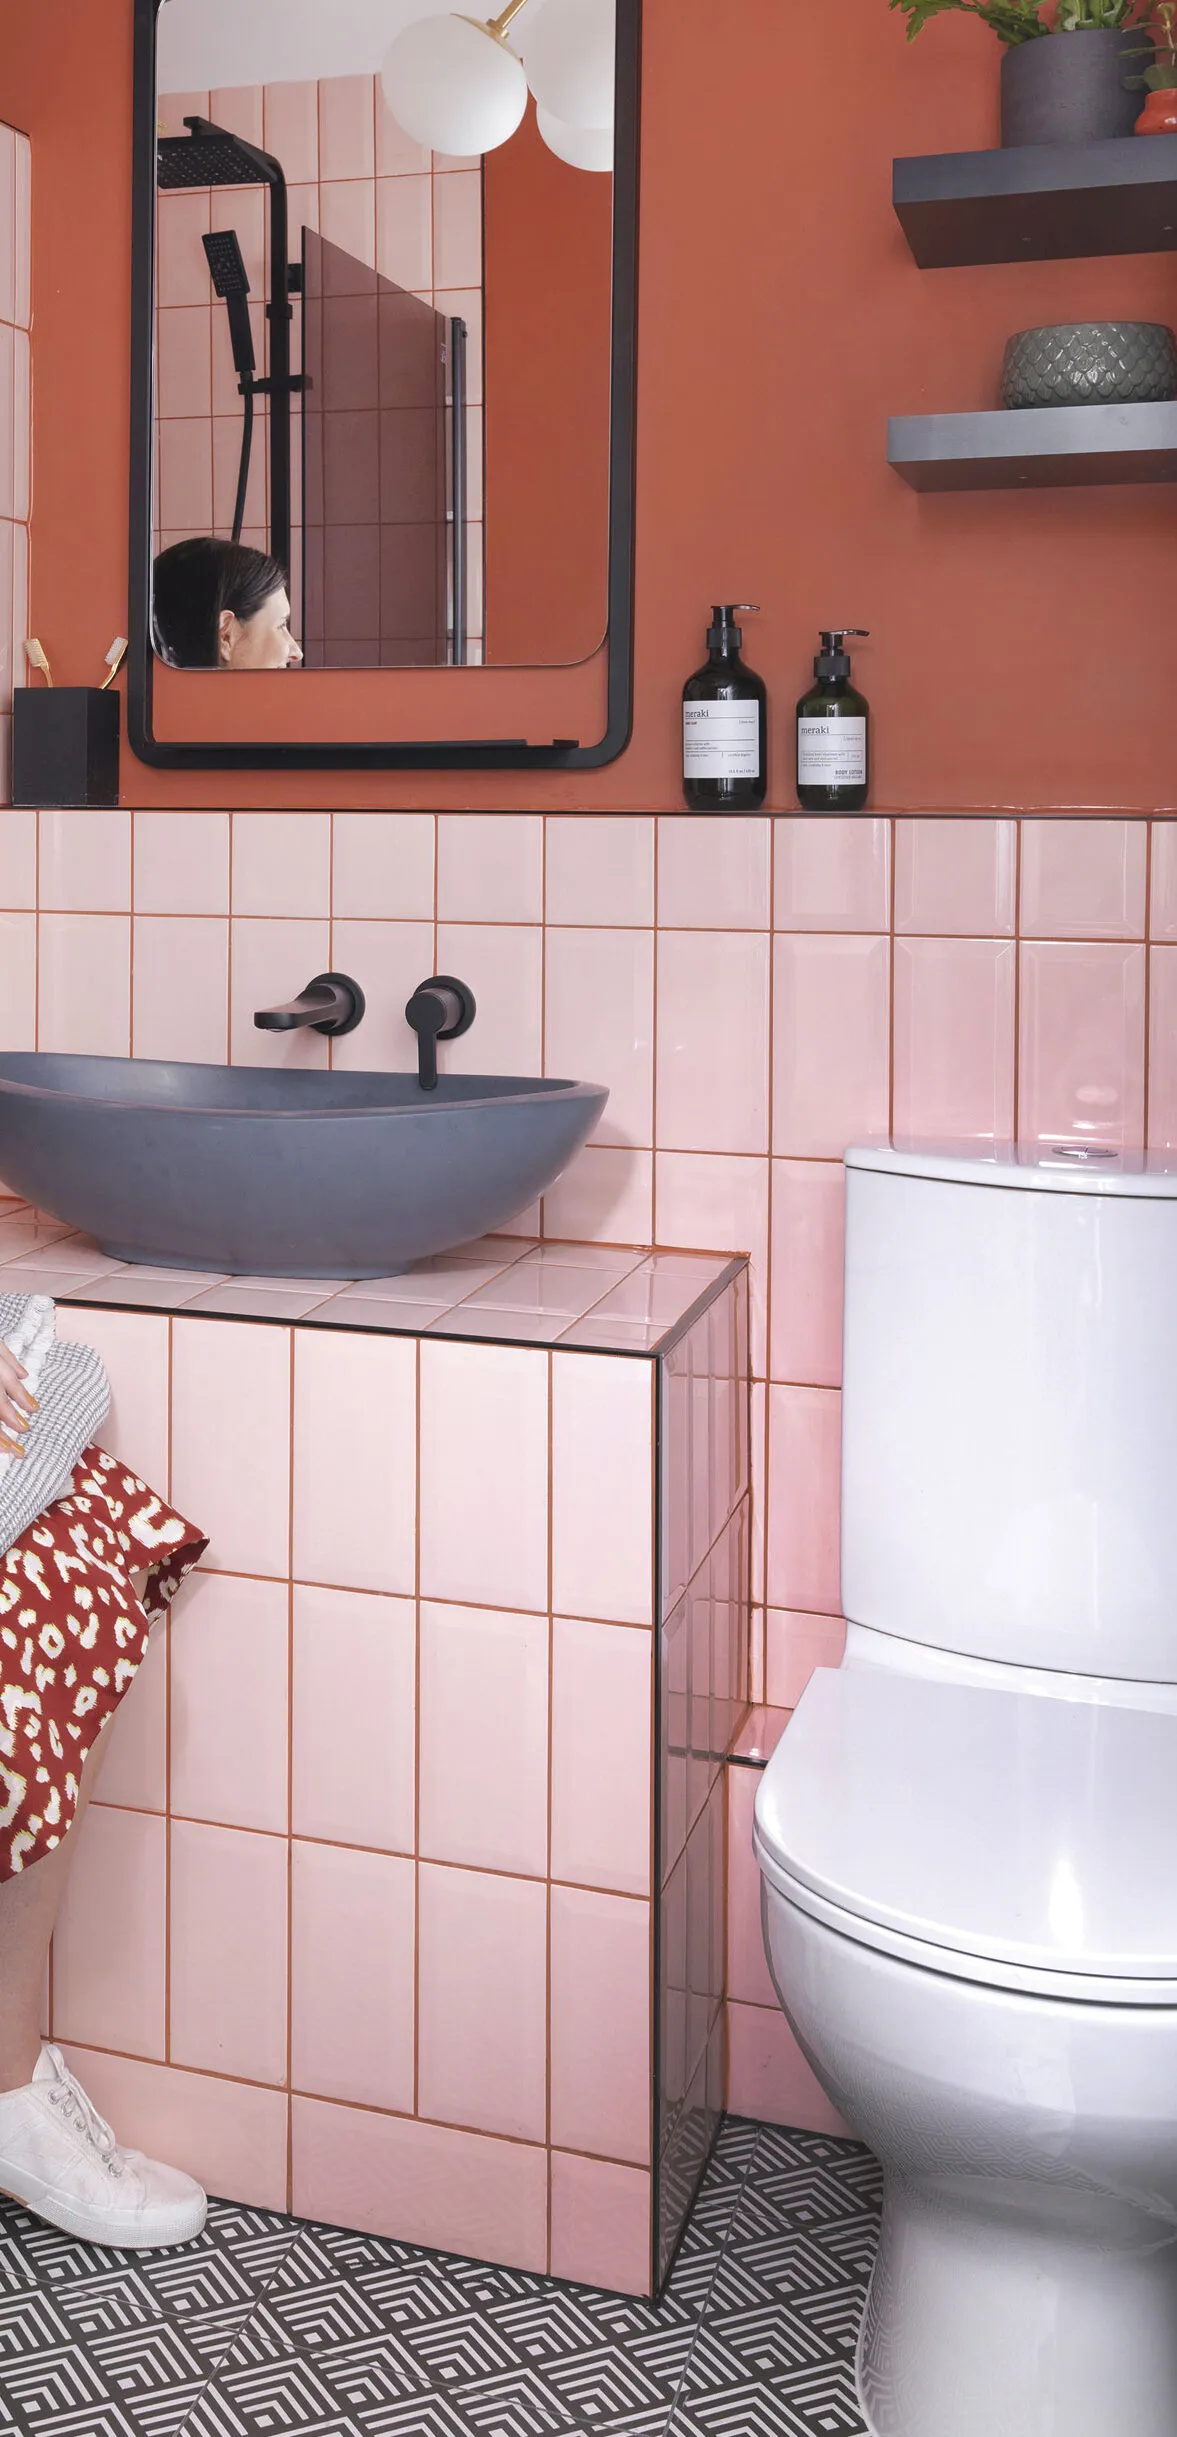 An earthy terracotta colour on the walls works perfectly against the blush metro tiles, which have been laid in a vertical formation rather than the usual brick- style pattern. A rimless loo from B&Q was chosen for its hygienic design, while the sink from BC Designs, mirror from Drench and taps from Crosswater all add a modern, sleek feel to the room. ‘I’m so pleased with how the bathroom has turned out,’ says Riannon. ‘I think the use of colours together makes a change to the standard white tiles and grey grout’